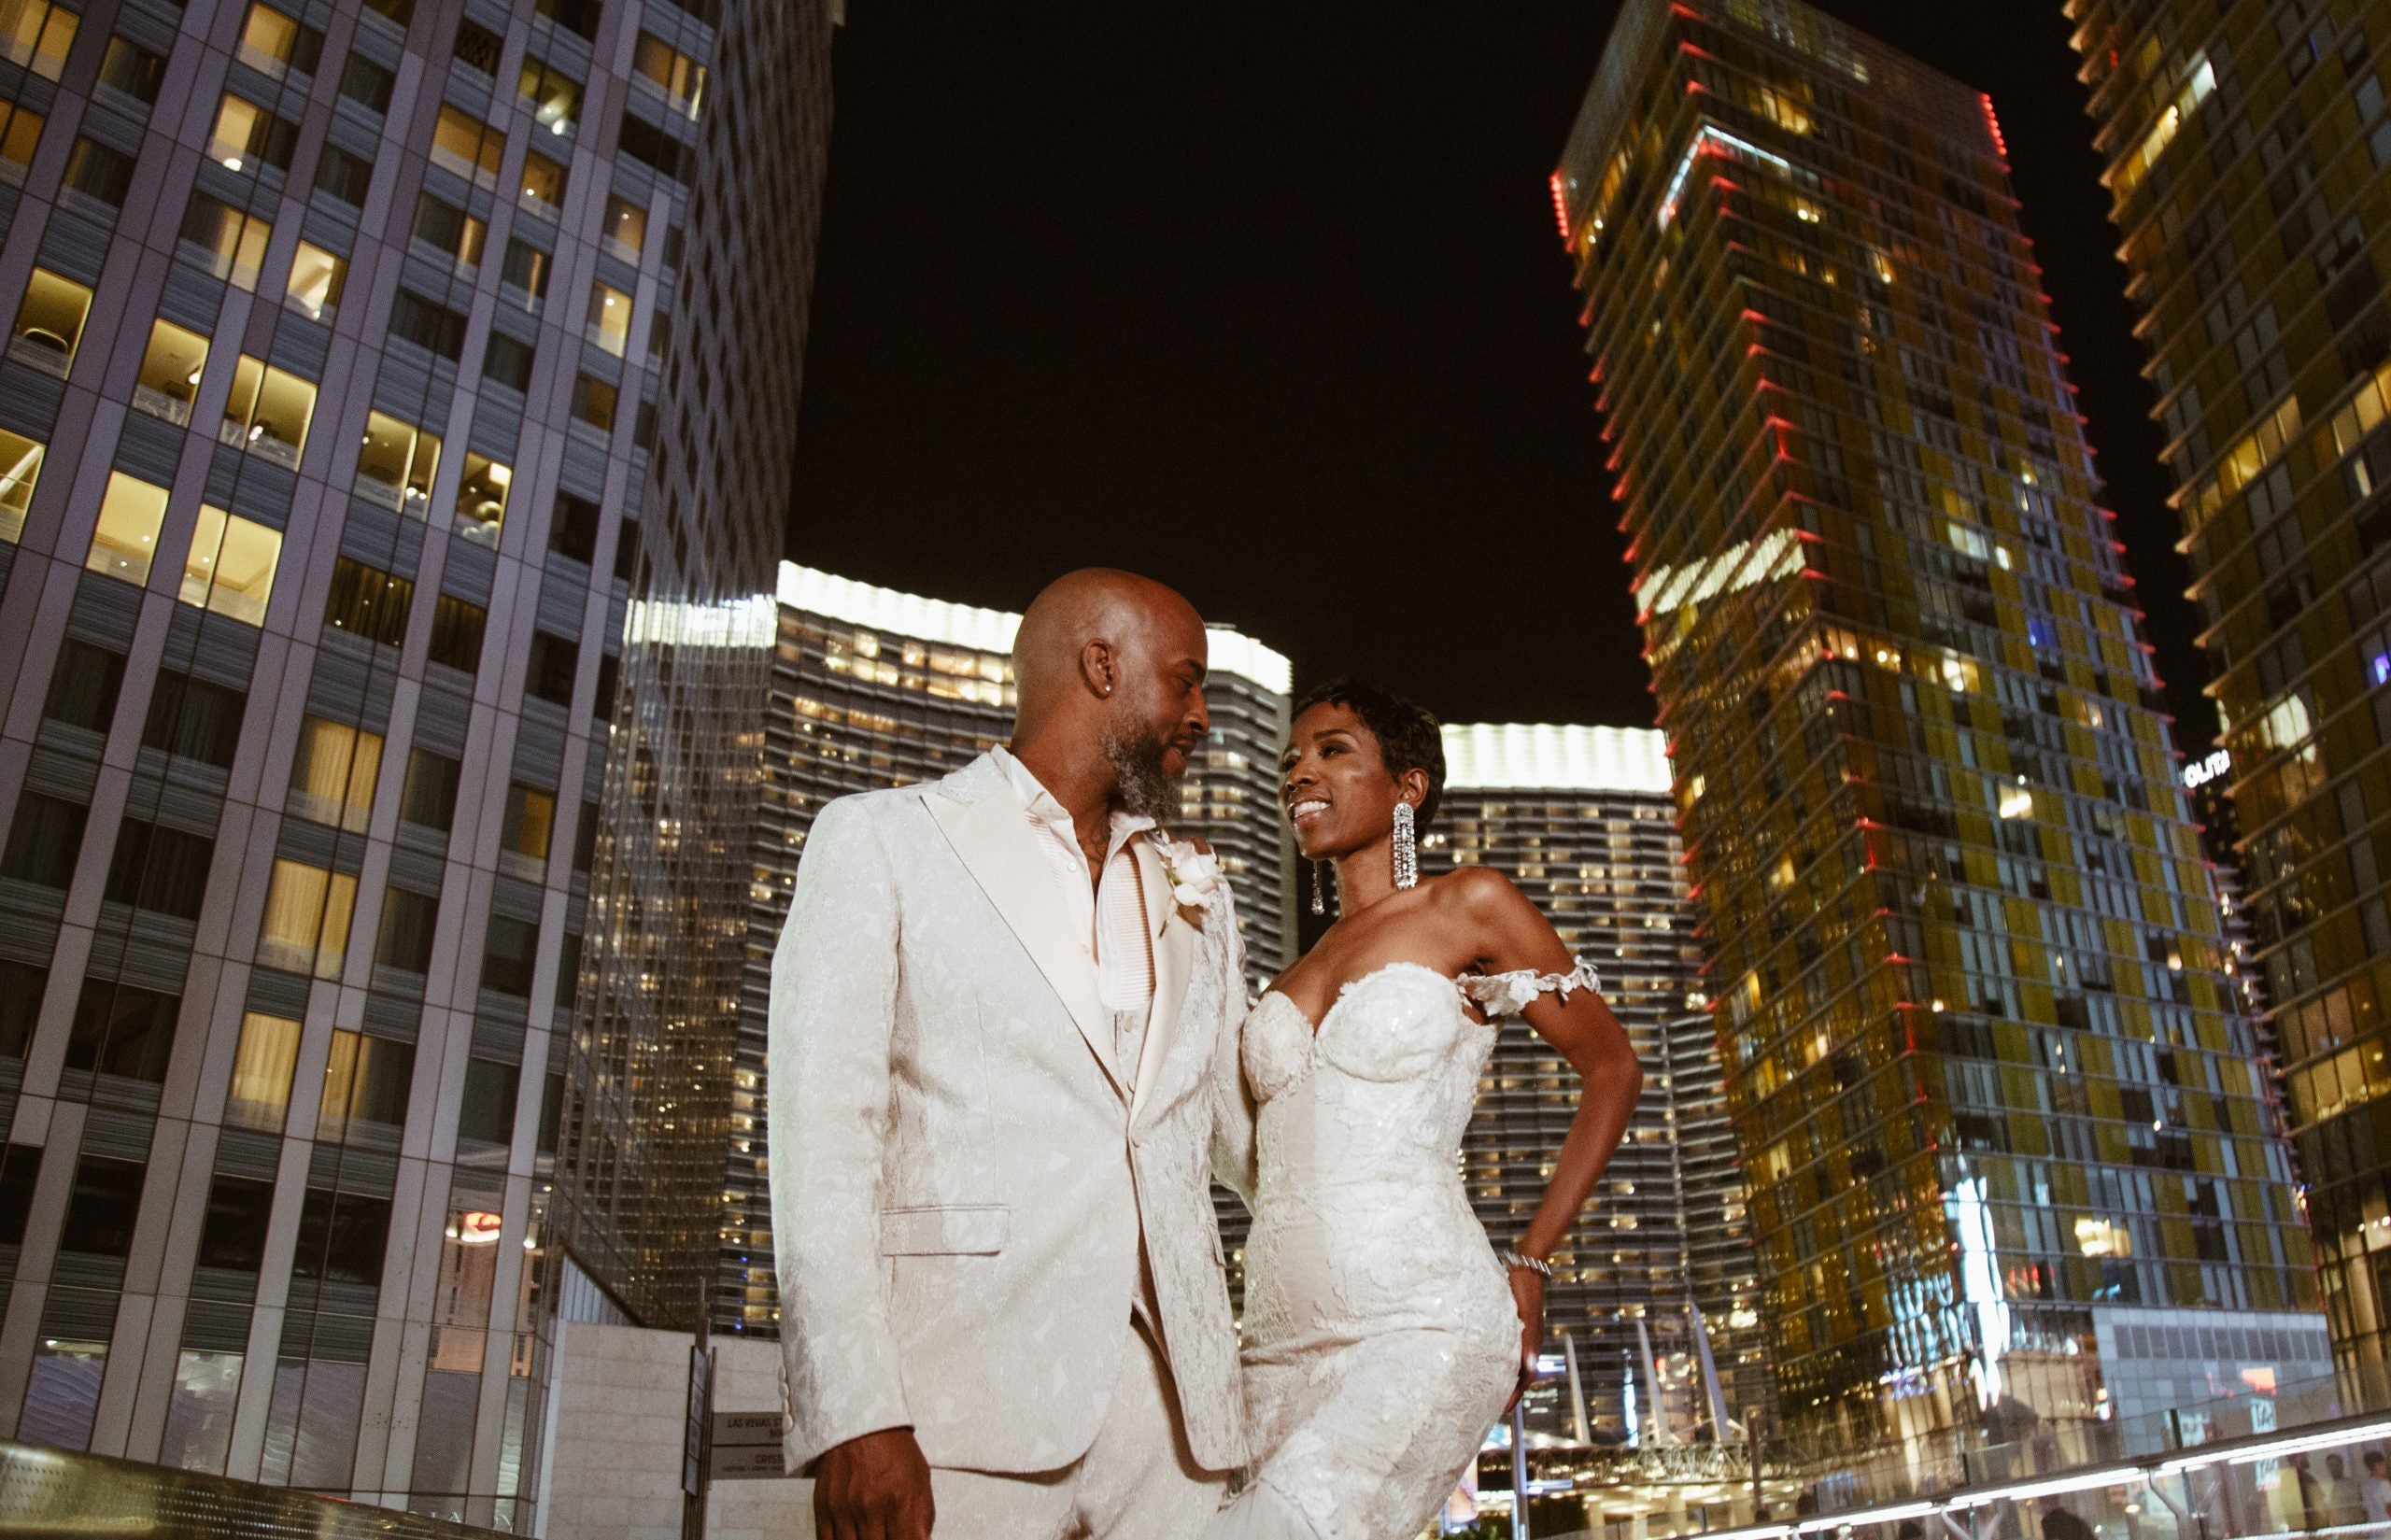 Bridal Bliss: Riqua And Andre's Las Vegas Wedding Included Showgirls, The Strip, And A Stunning Desert Ceremony